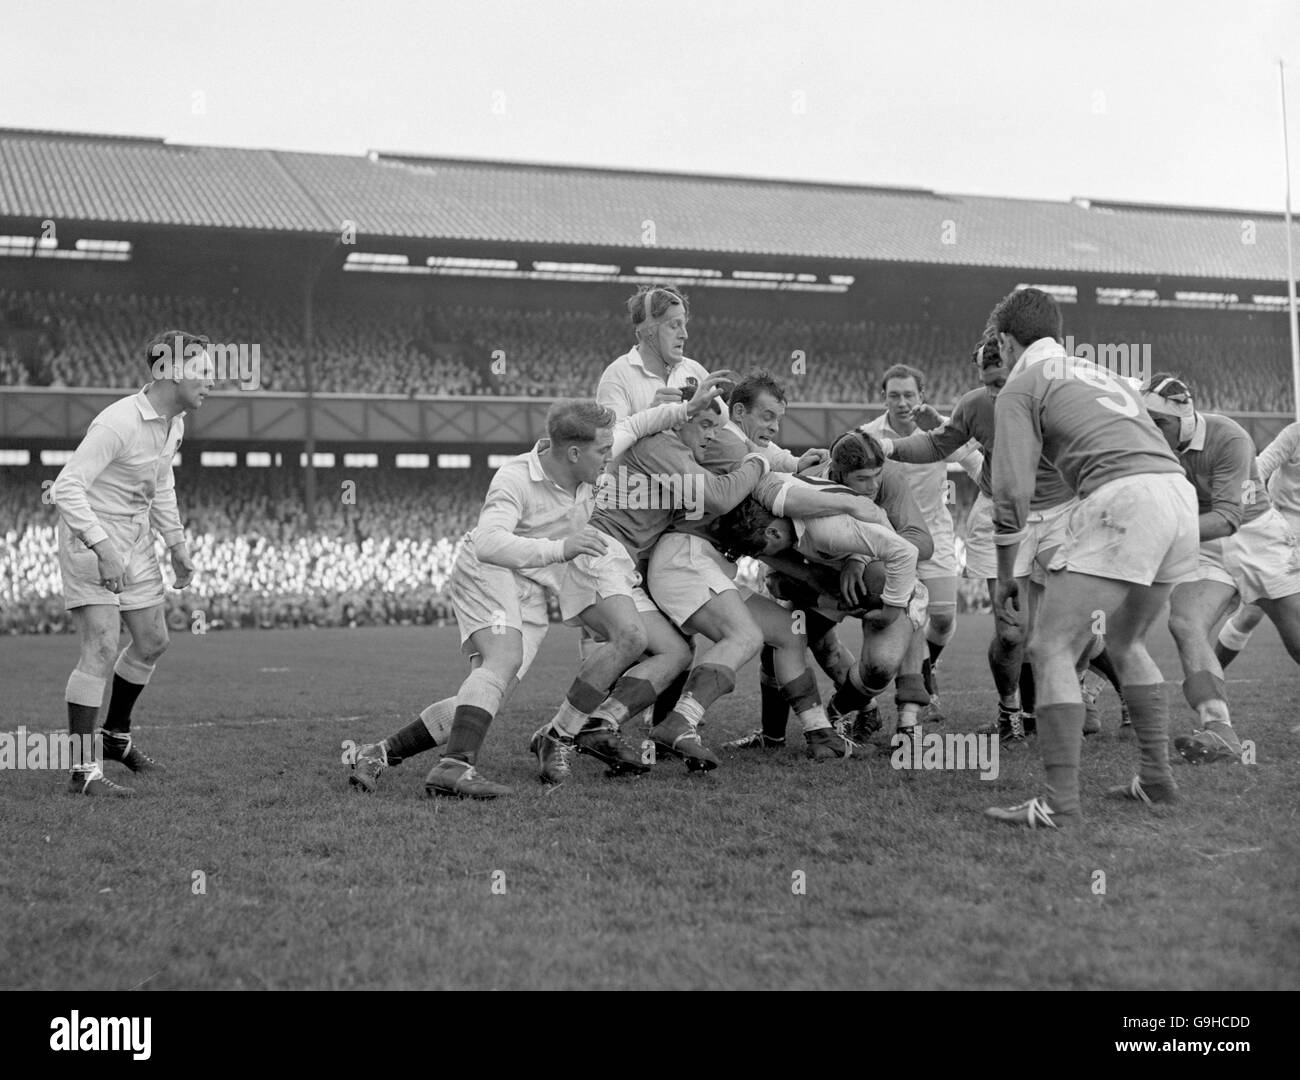 England's Gordon Bendon (c, with ball) is tackled by (l-r) France's Aldo Quaglio, Robert Vigier and Bernard Mommejat as teammate Peter Jackson (far l) looks on Stock Photo